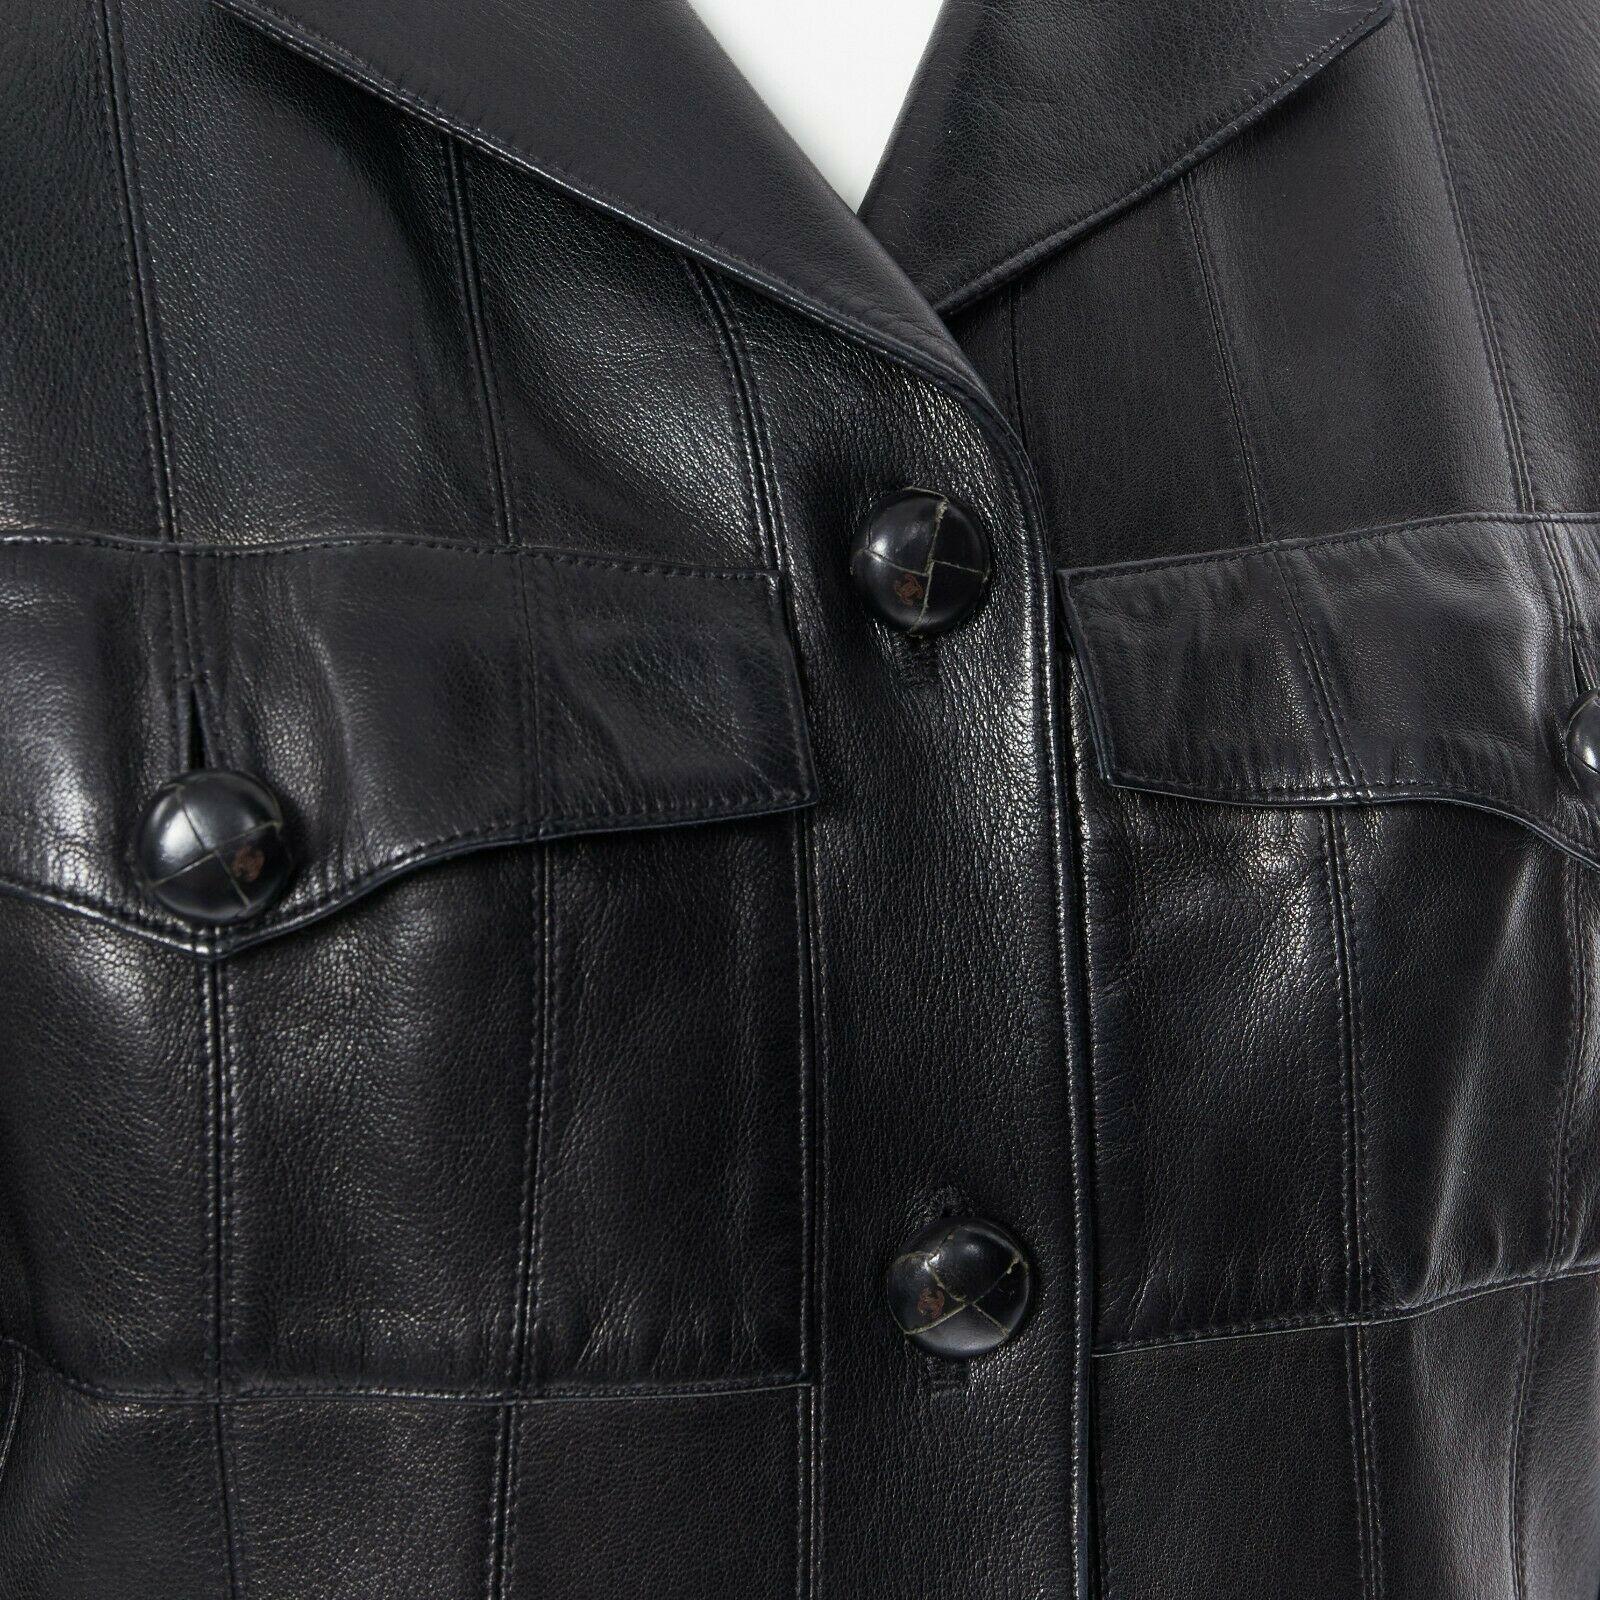 CHANEL 03A LBJ black 4 flap pocket panel constructed leather jacket FR40
Brand: CHANEL
Designer: Karl Lagerfeld
Collection: 03A
Model Name / Style: Leather jacket
Material: Leather
Color: Black
Pattern: Solid
Closure: Button
Lining material: